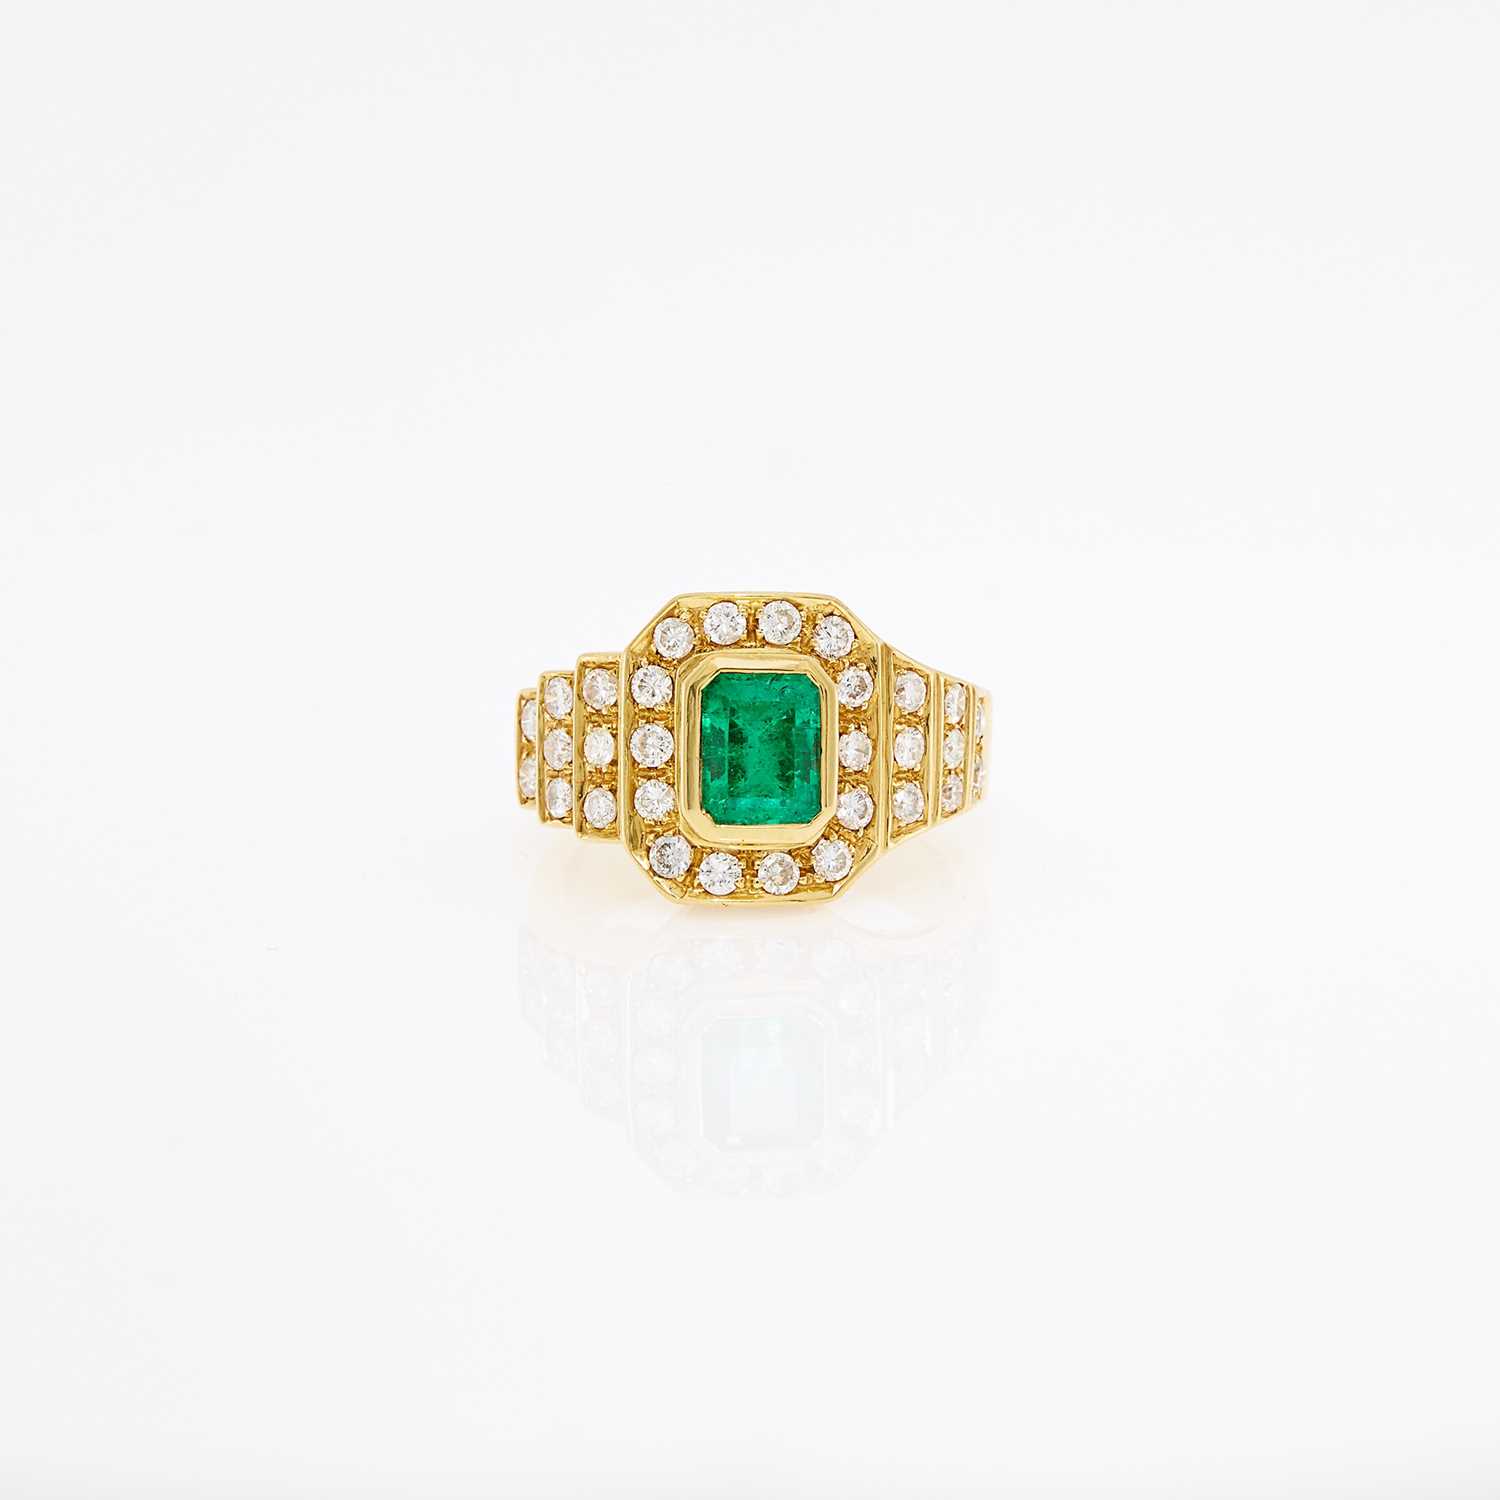 Lot 1031 - Gold, Emerald and Diamond Ring